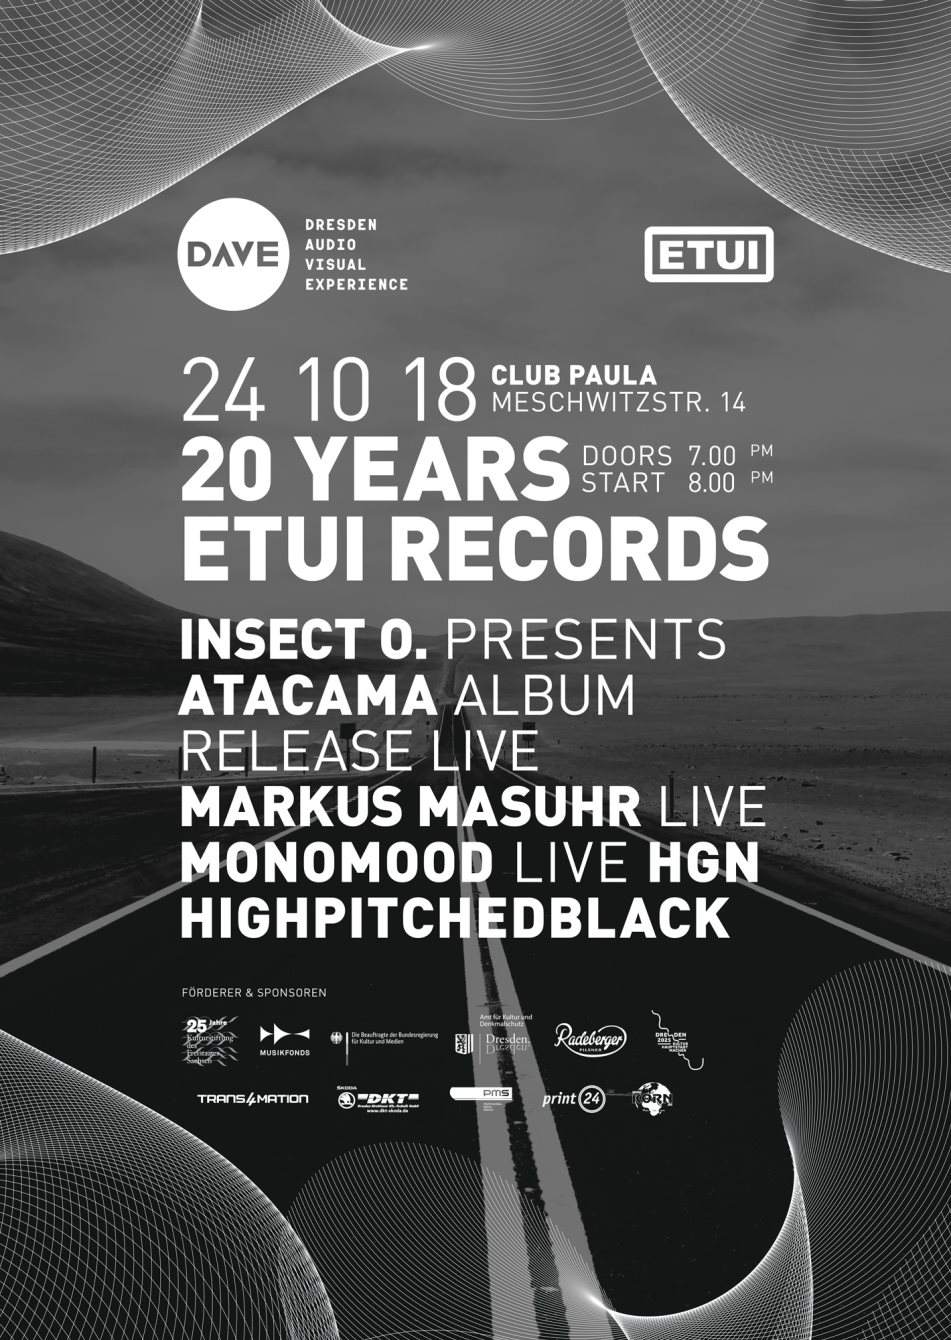 DAVE Festival 2018 - 20 Years Etui Records - Página frontal